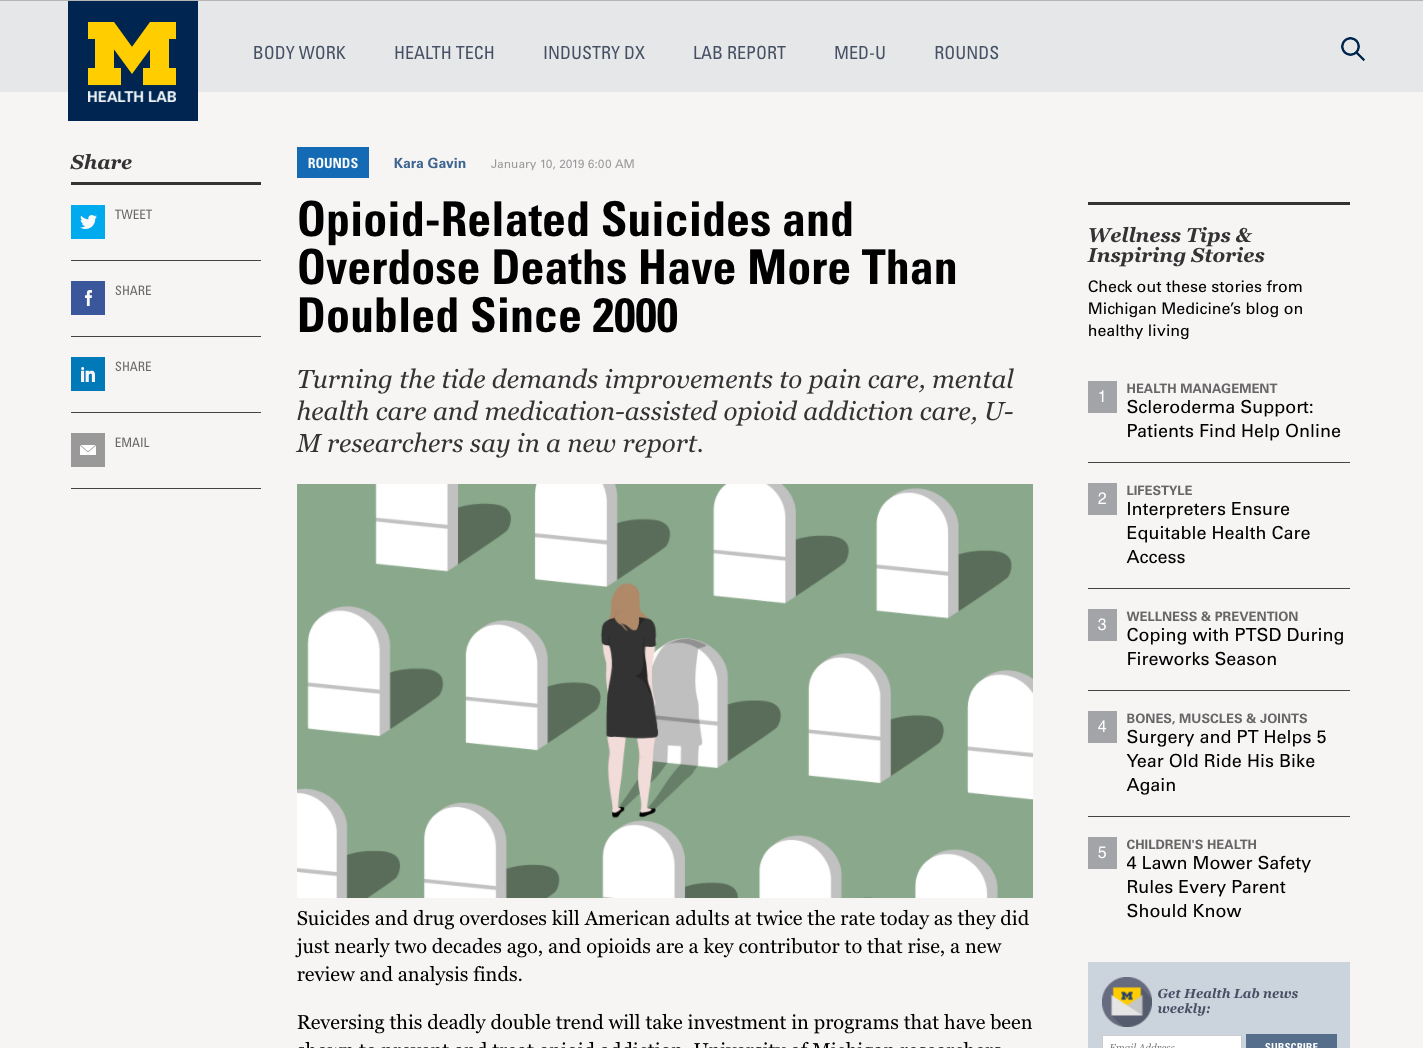 011019_Mich-Opioid-Article.png